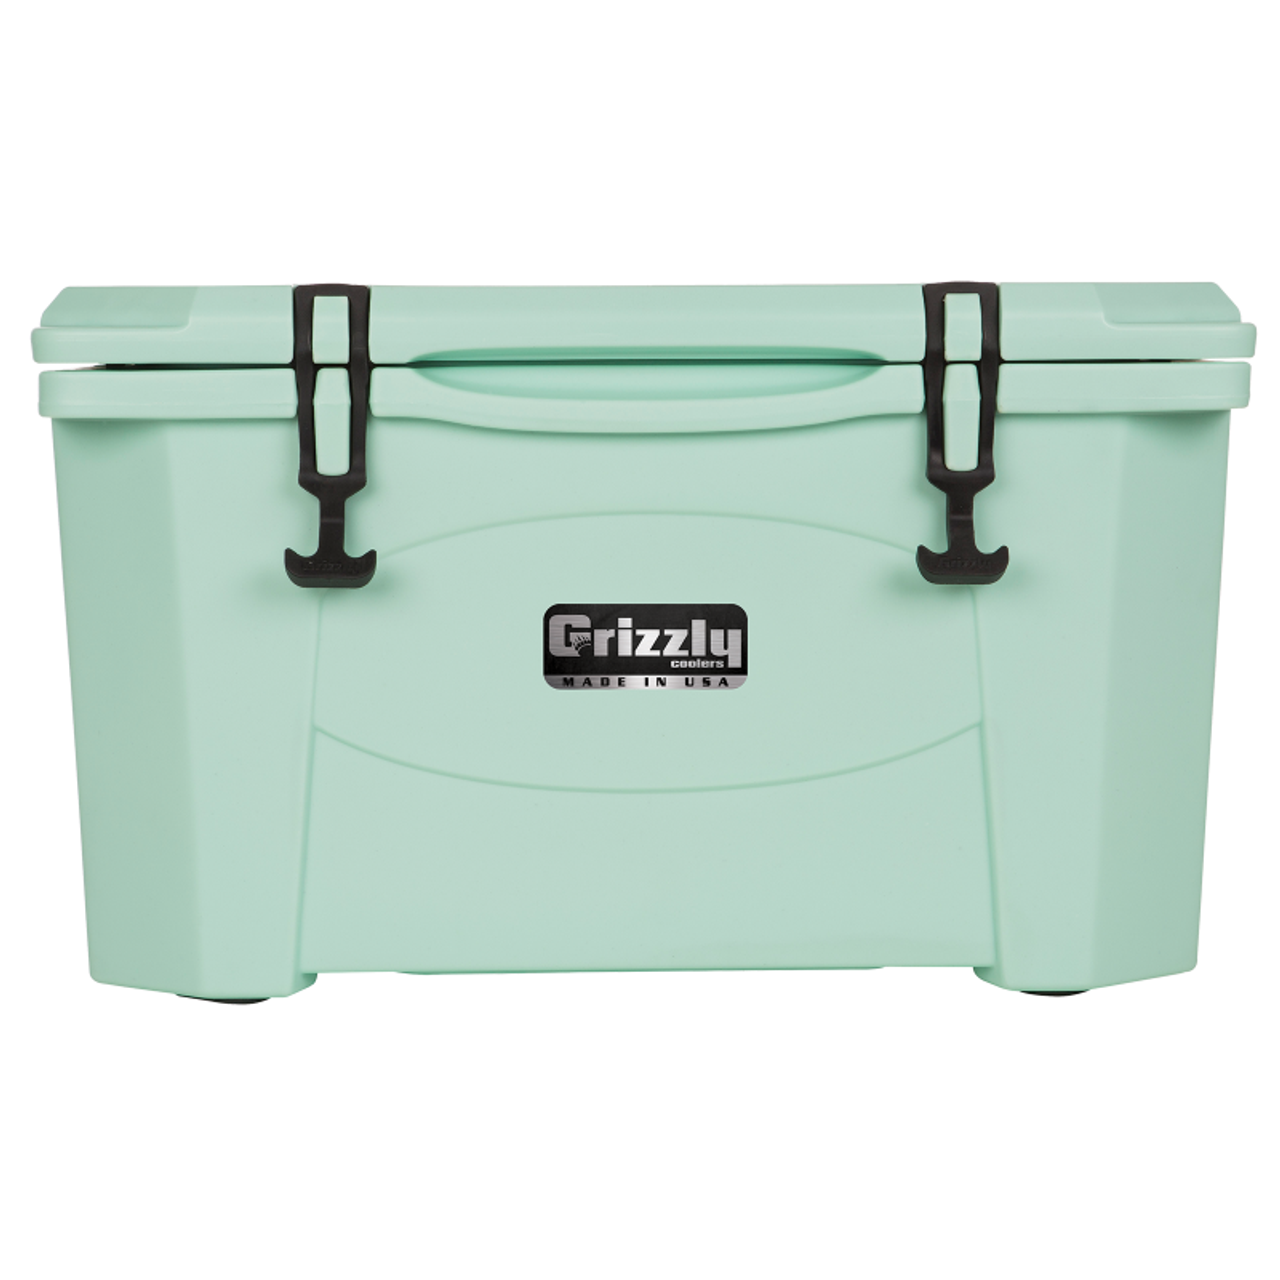 GRIZZLY 400016 G40 Cooler